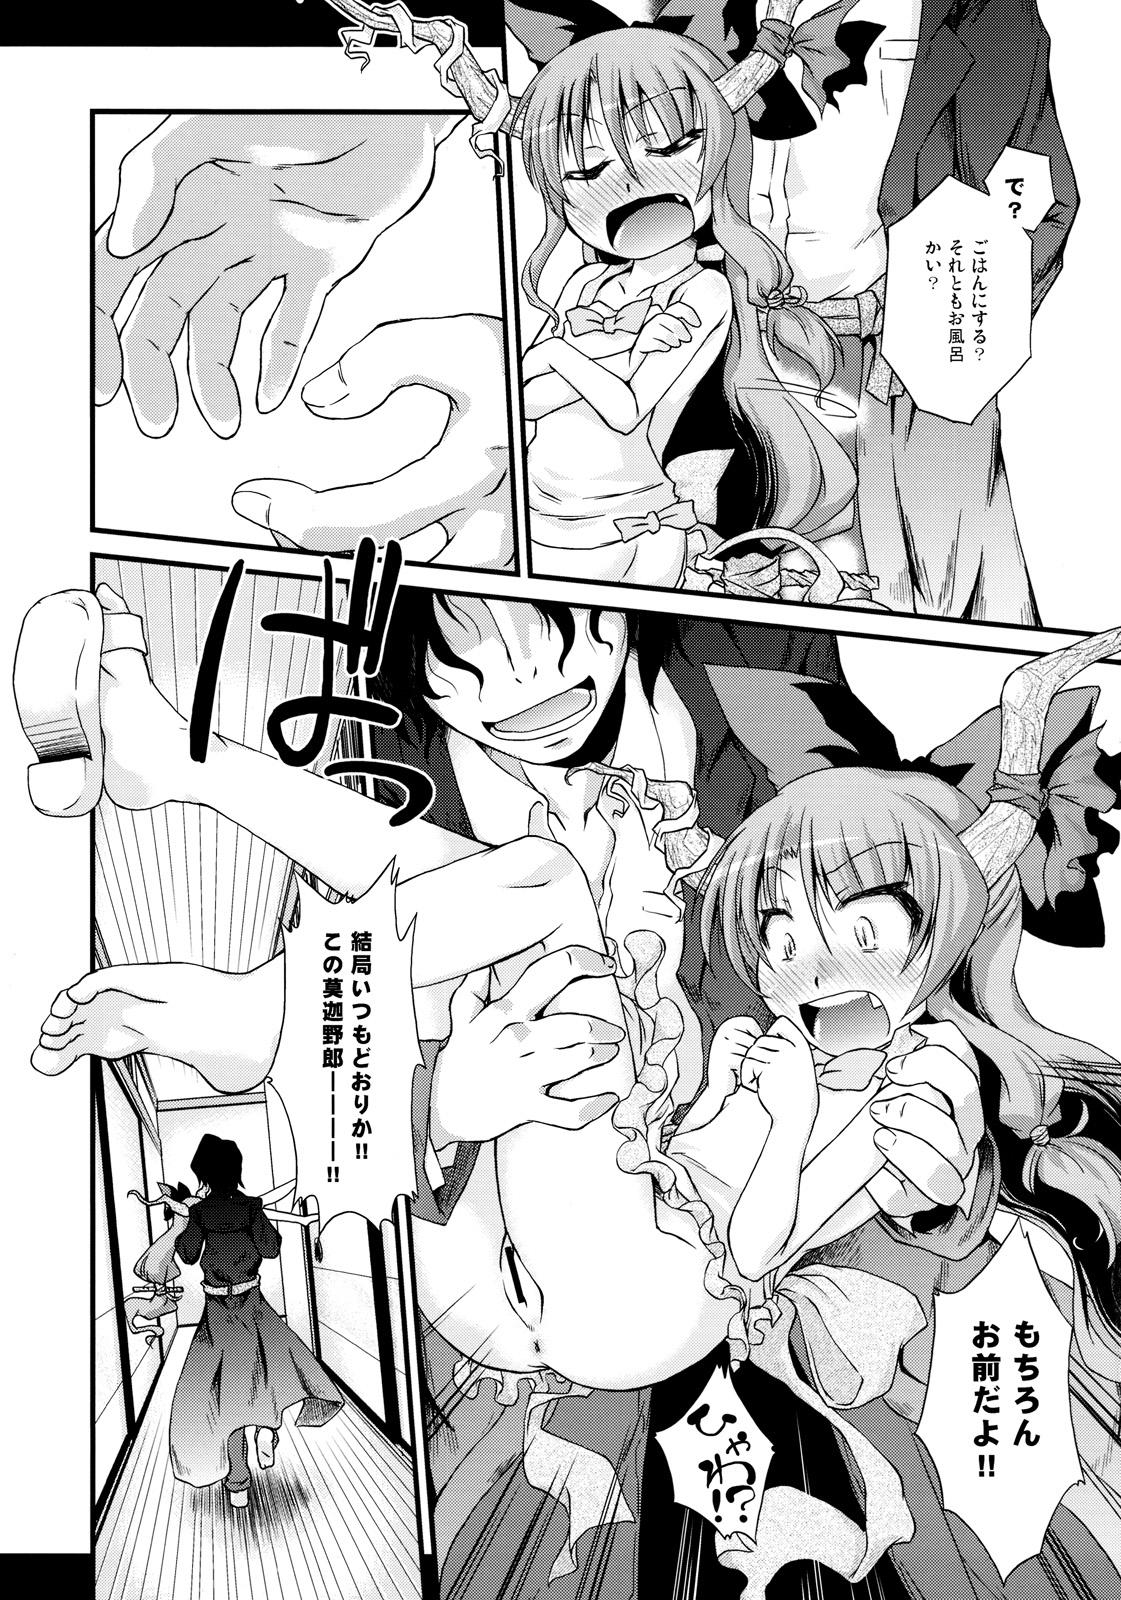 Ass To Mouth Kyoujun Outbreak - Touhou project Petite Porn - Page 5